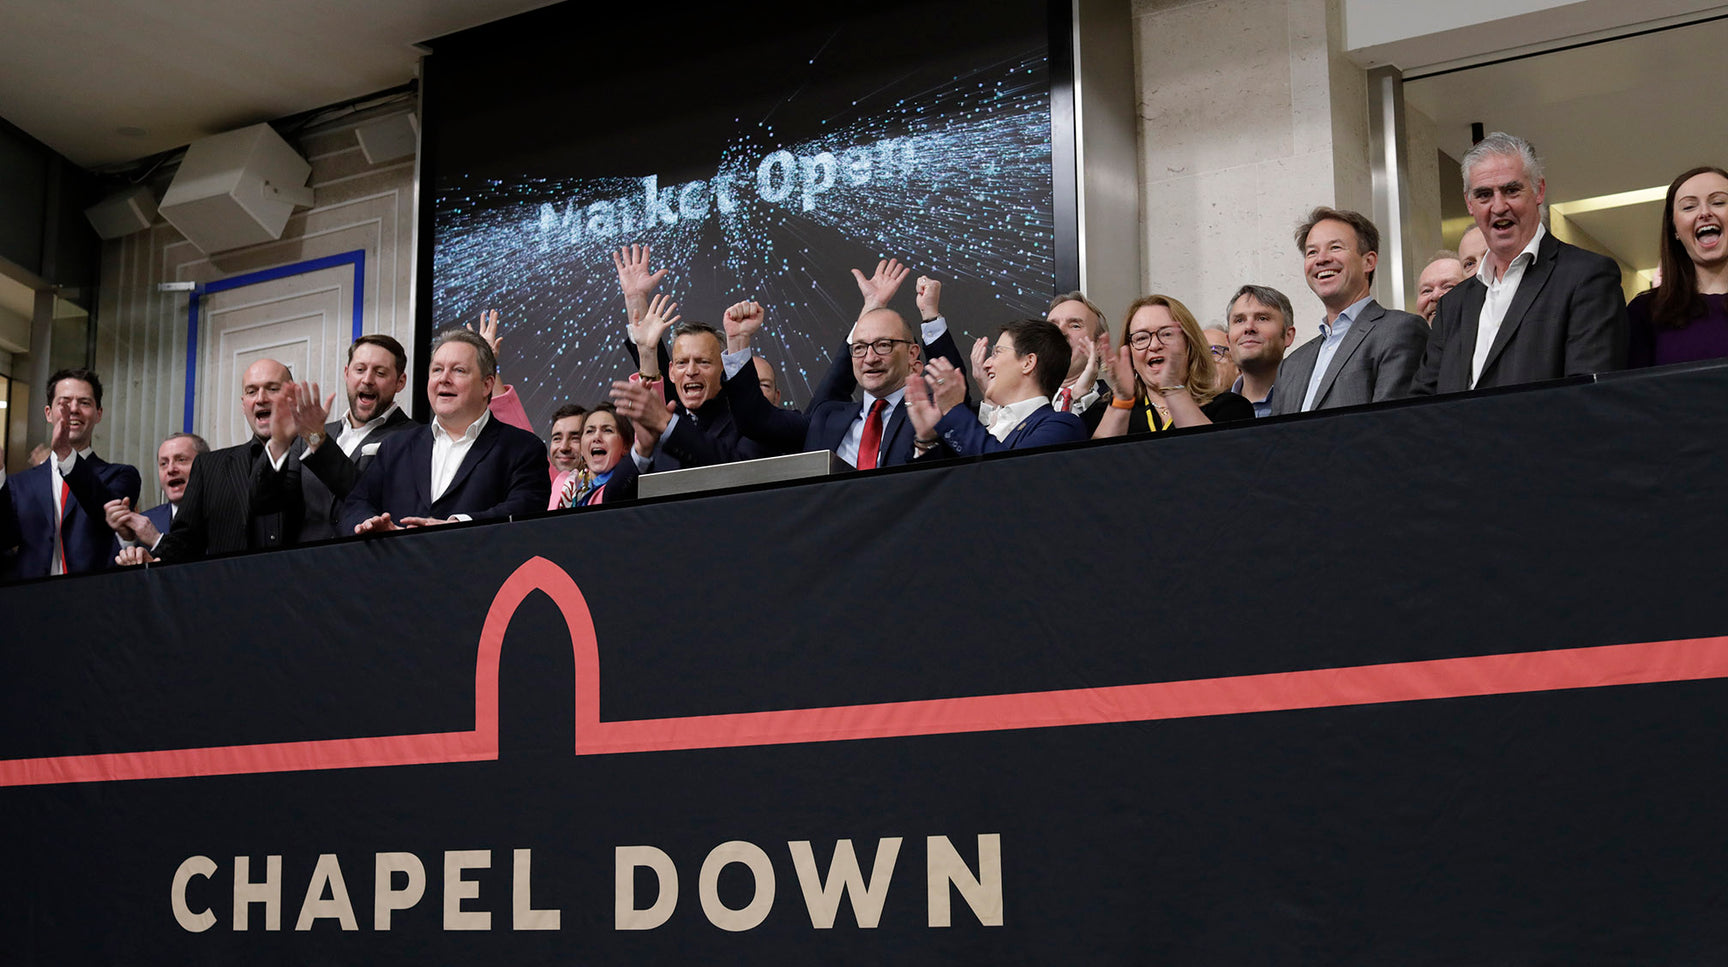 Chapel Down celebrate opeing of the London Stock Exchange